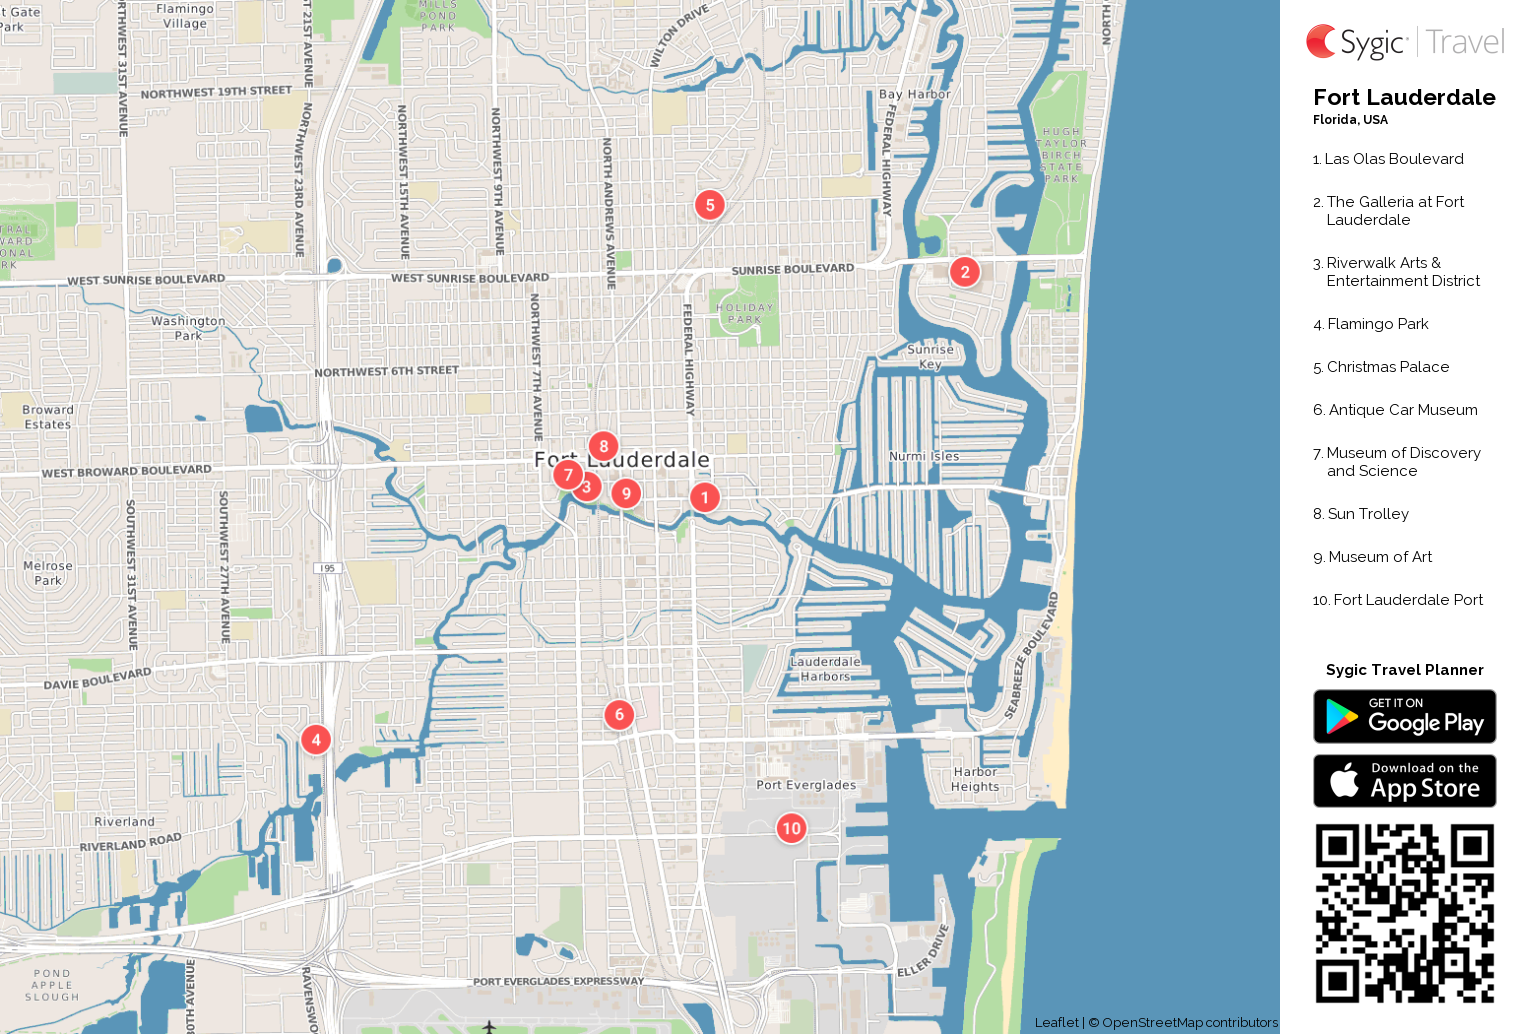 fort lauderdale printable tourist map | sygic travel